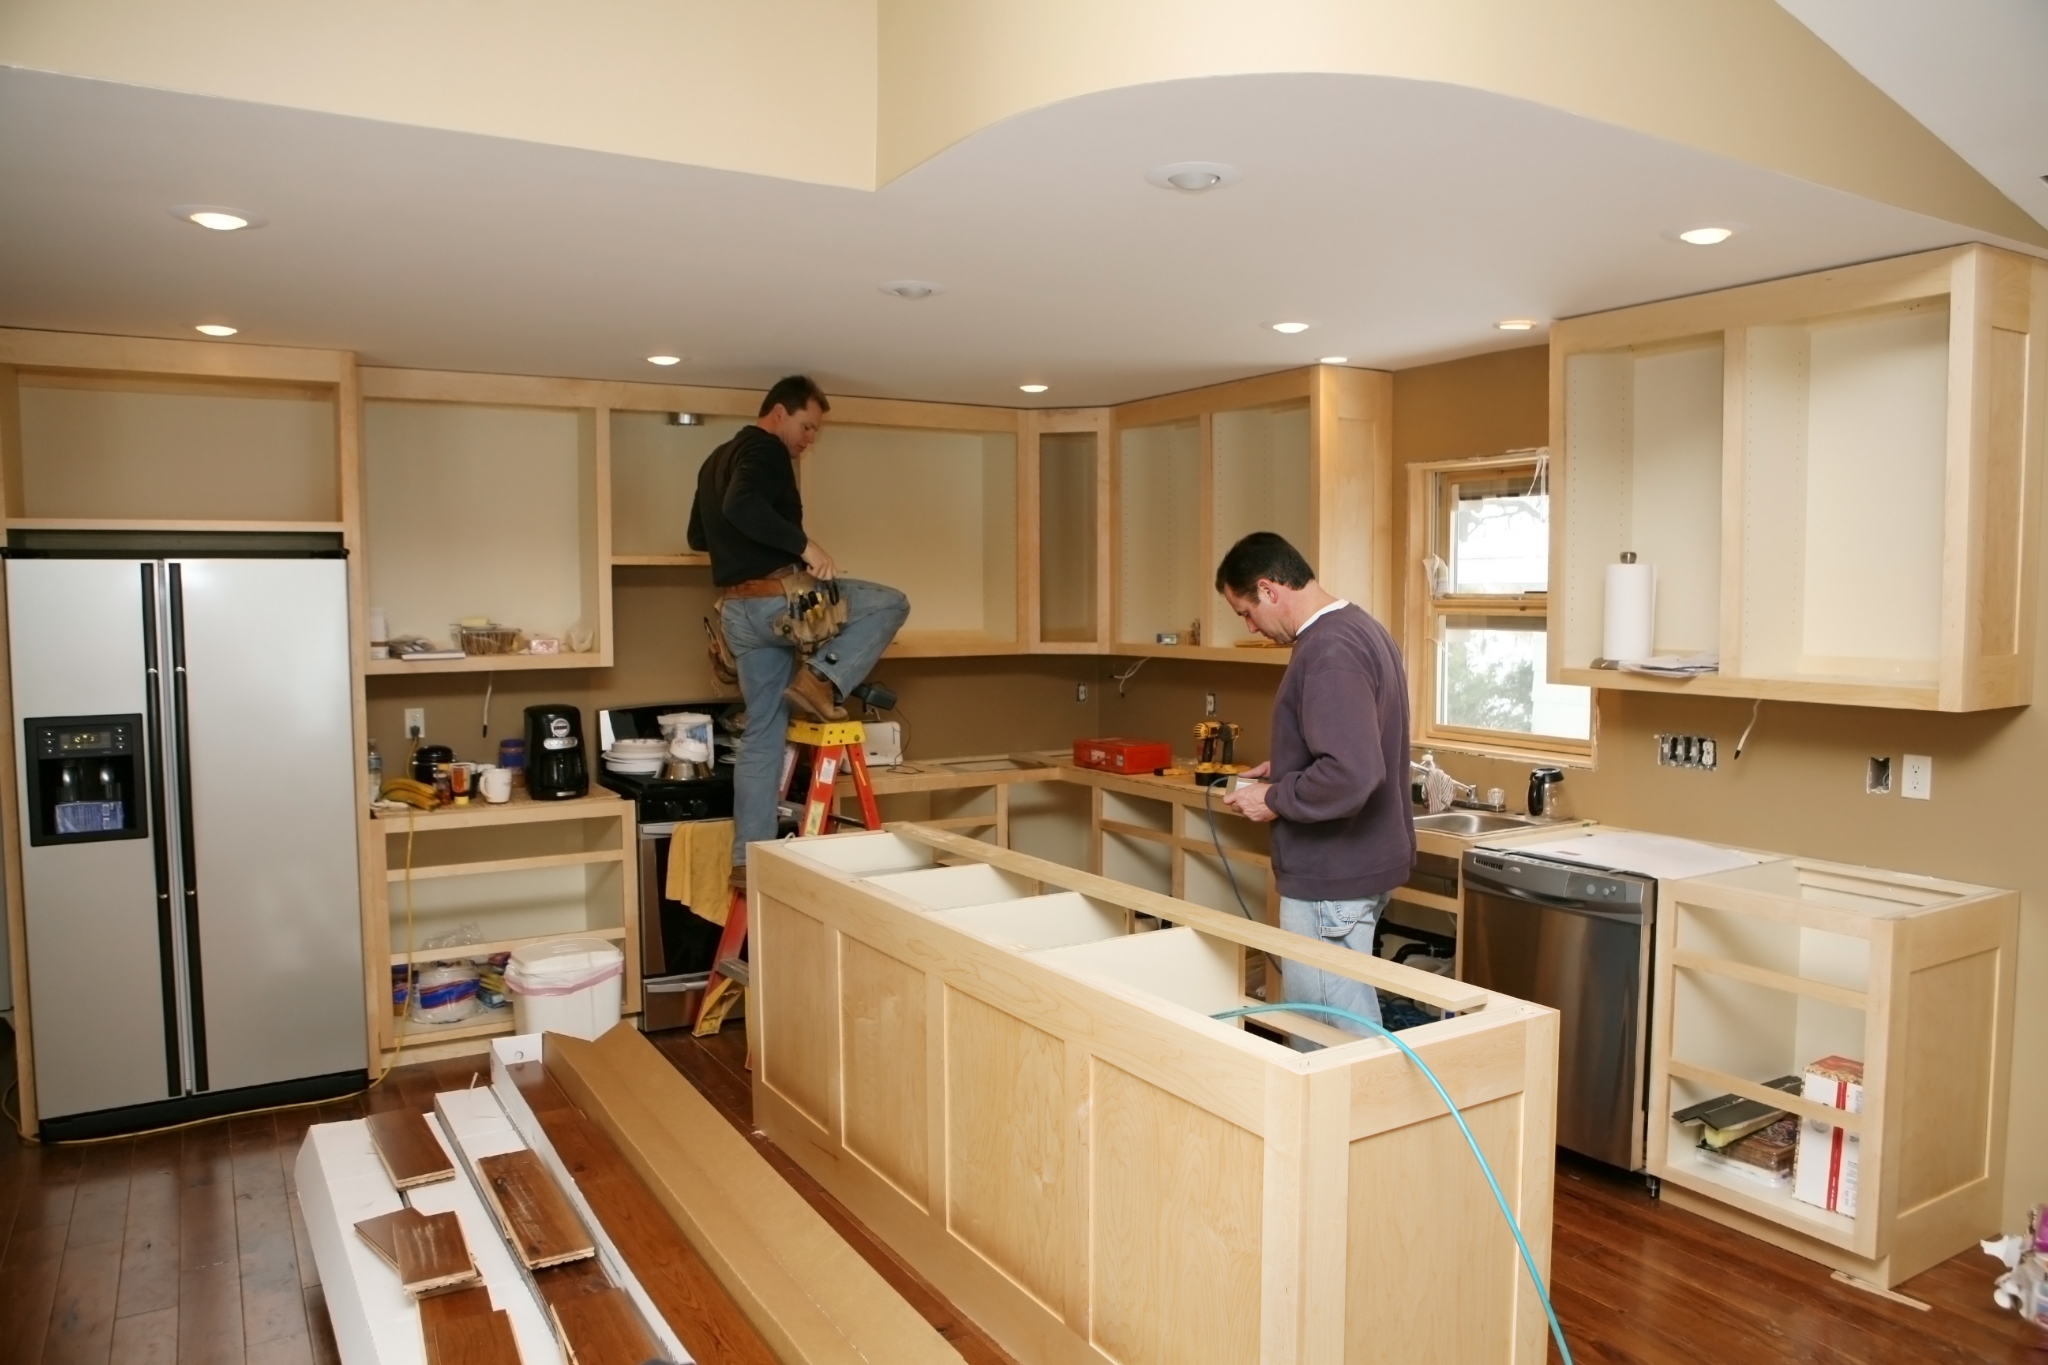 Kitchen Remodel Return On Investment, How Much Money Would It Cost To Remodel A Kitchen